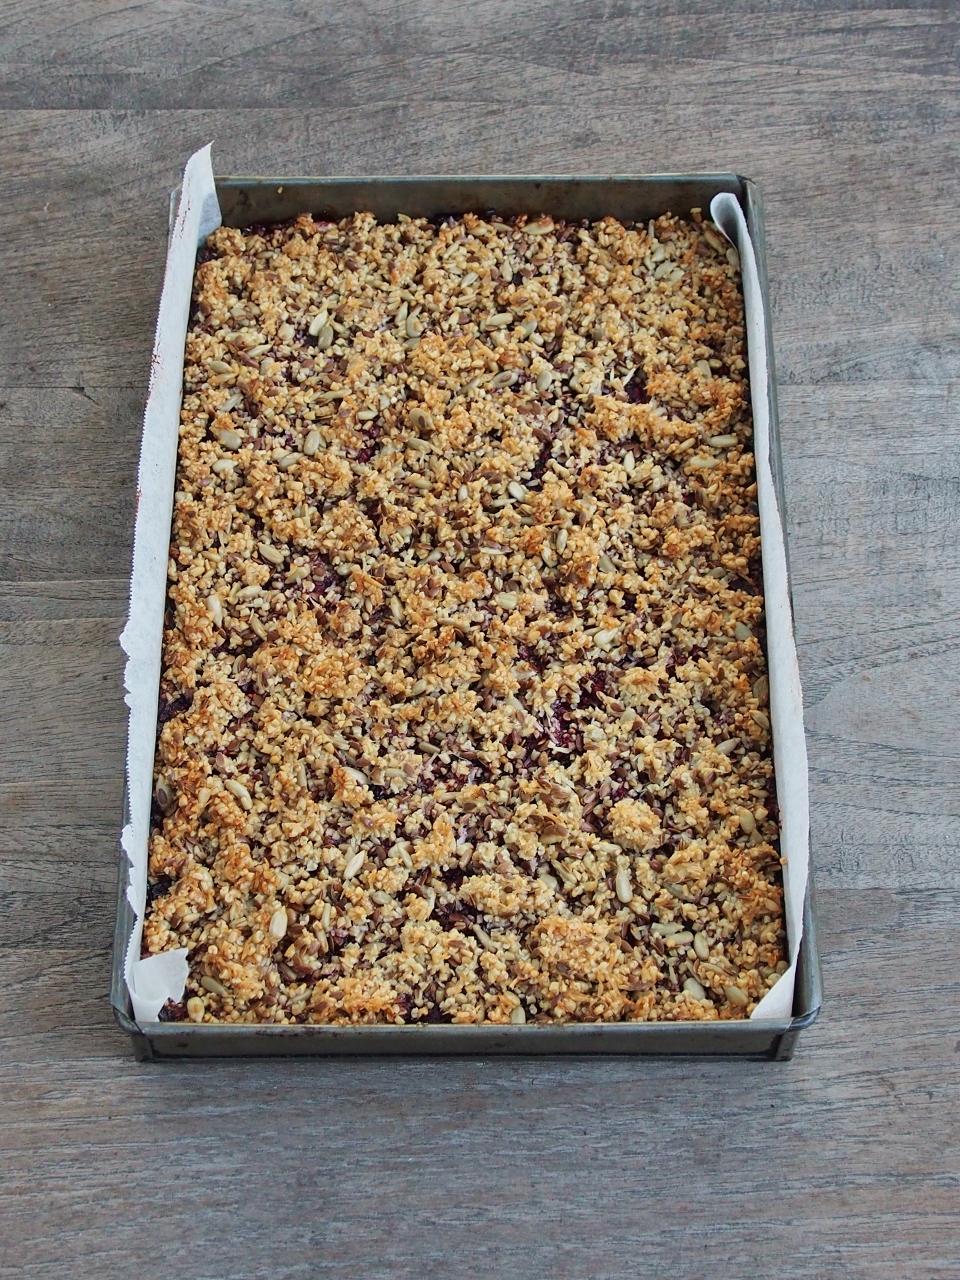 a healthier slice, full of wholegrain oats, seeds and berries